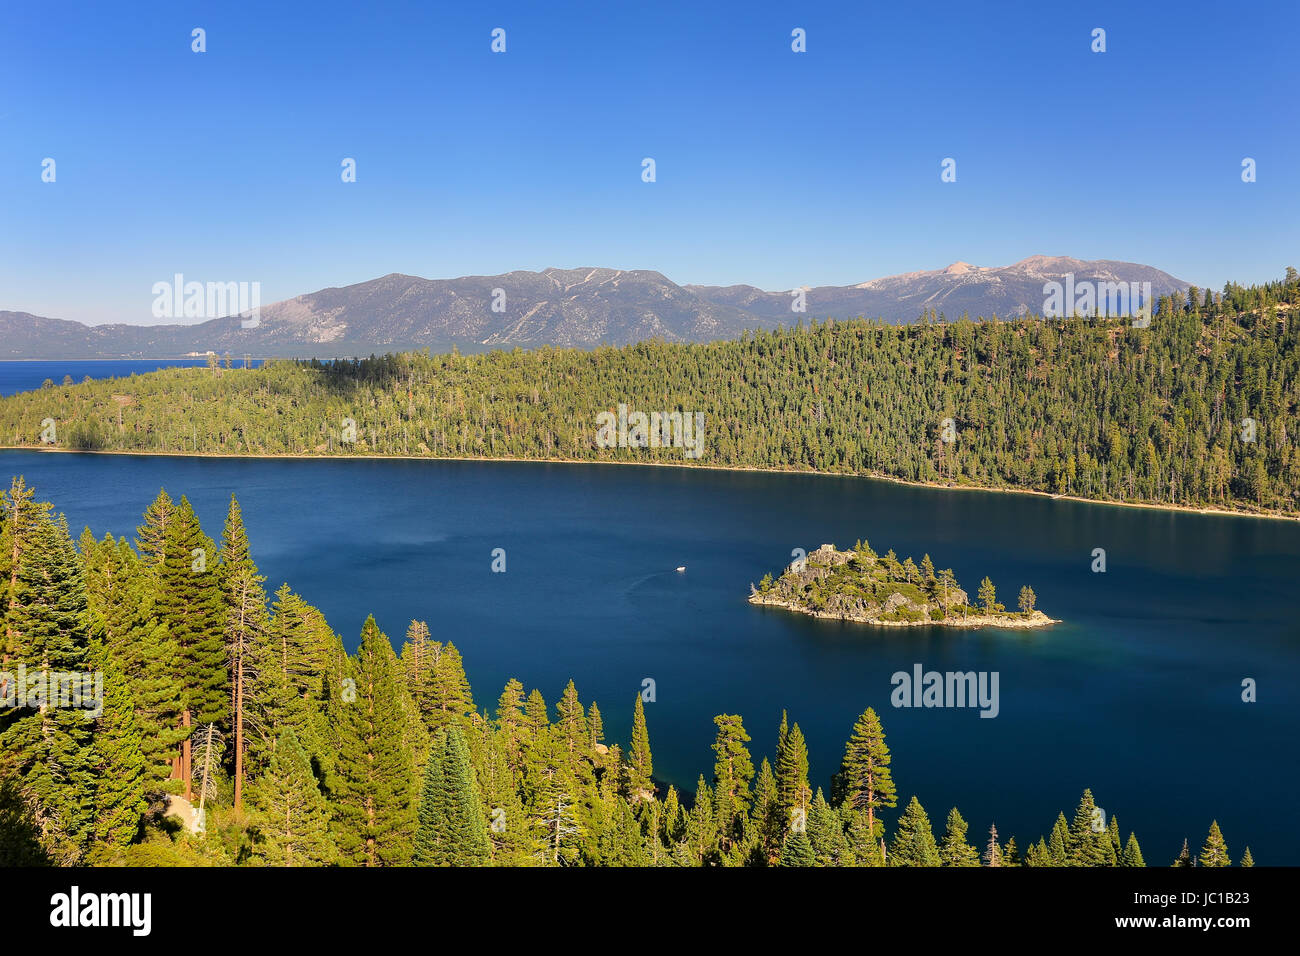 Fannette Island in Emerald Bay at Lake Tahoe, California, USA. Lake Tahoe is the largest alpine lake in North America Stock Photo